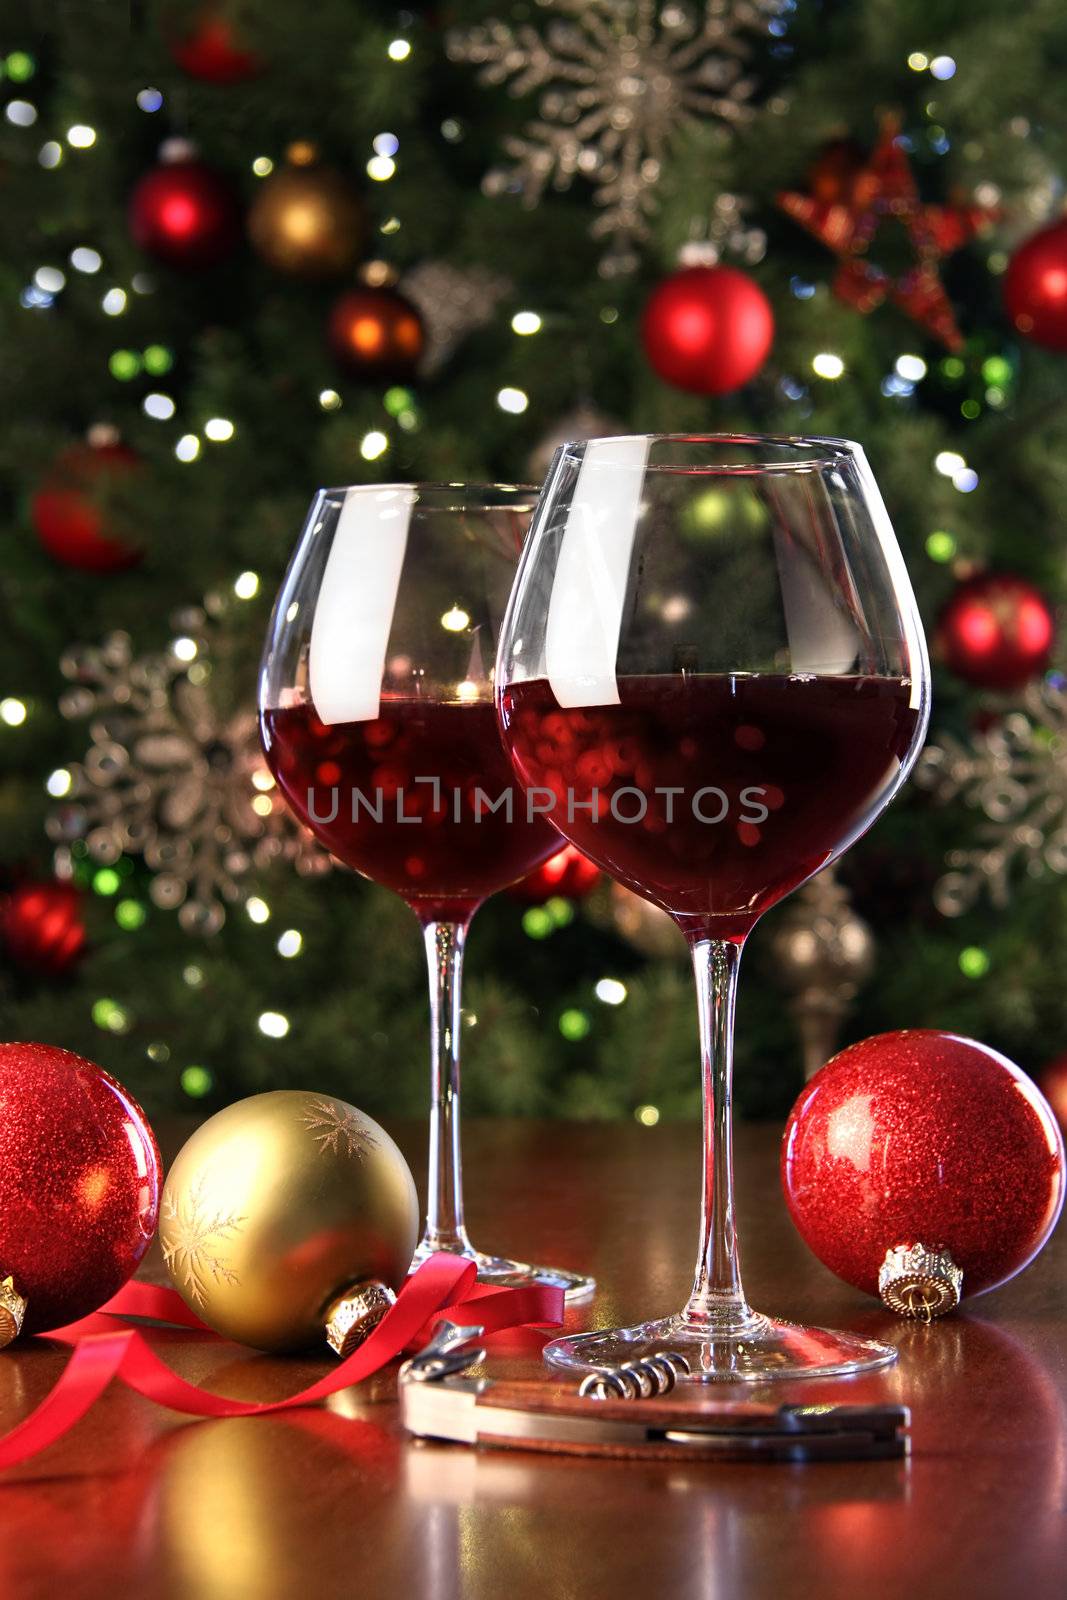 Glasses of red wine in front of Christmas tree for the holidays